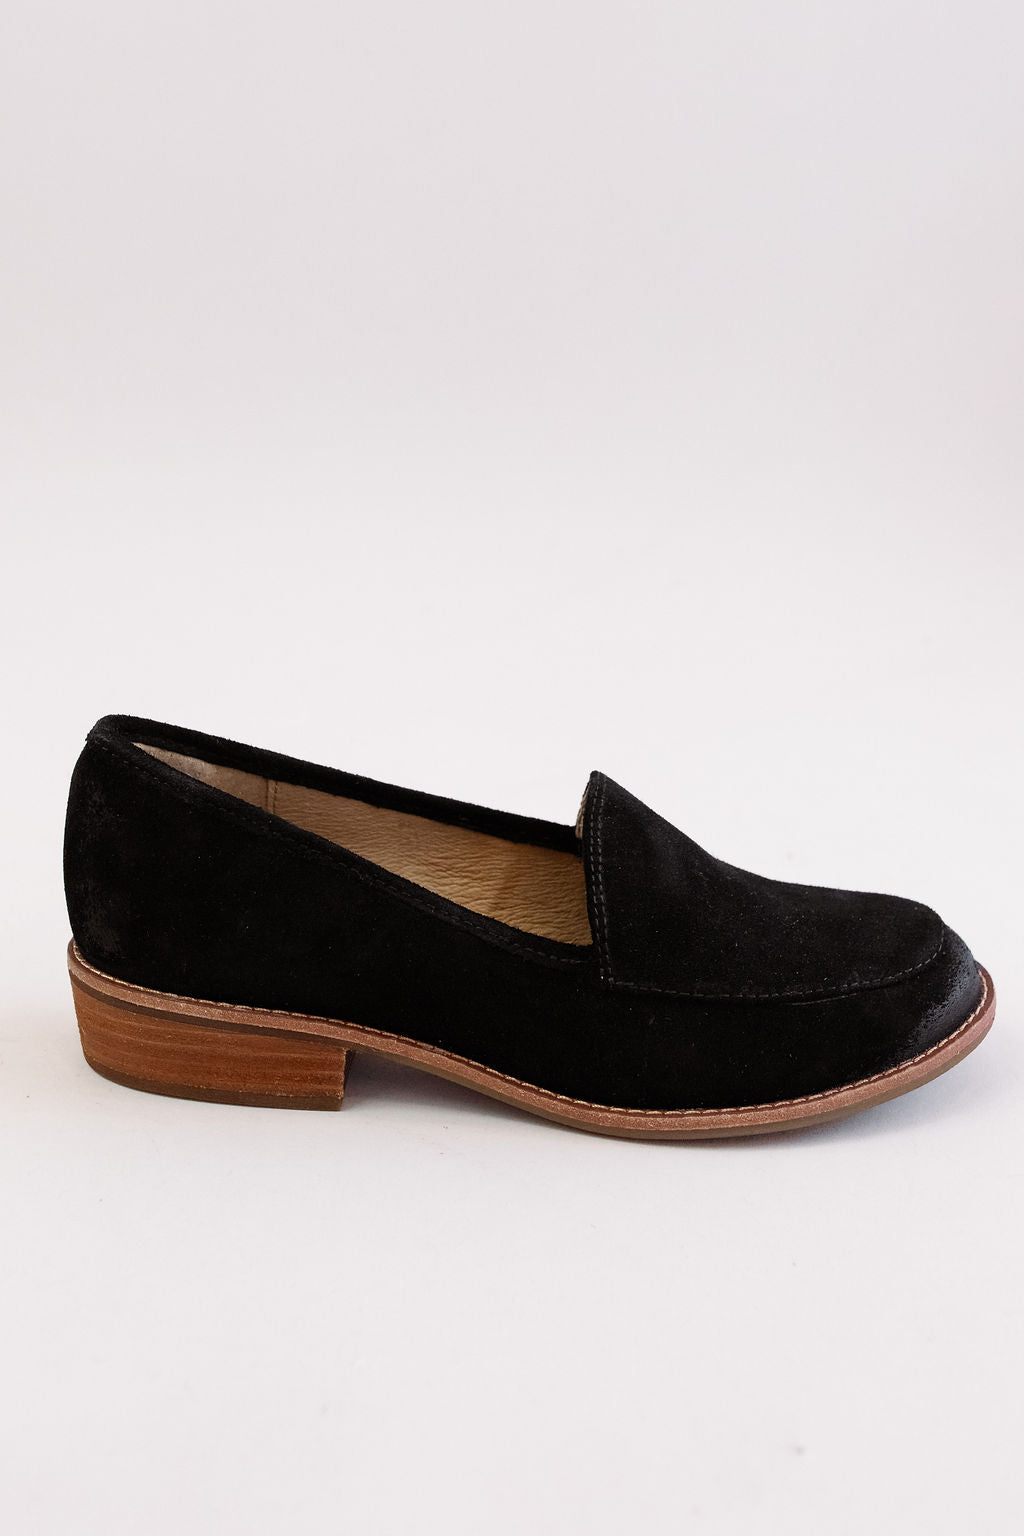 Sofft | Napoli Loafer | Black Suede - Poppy and Stella